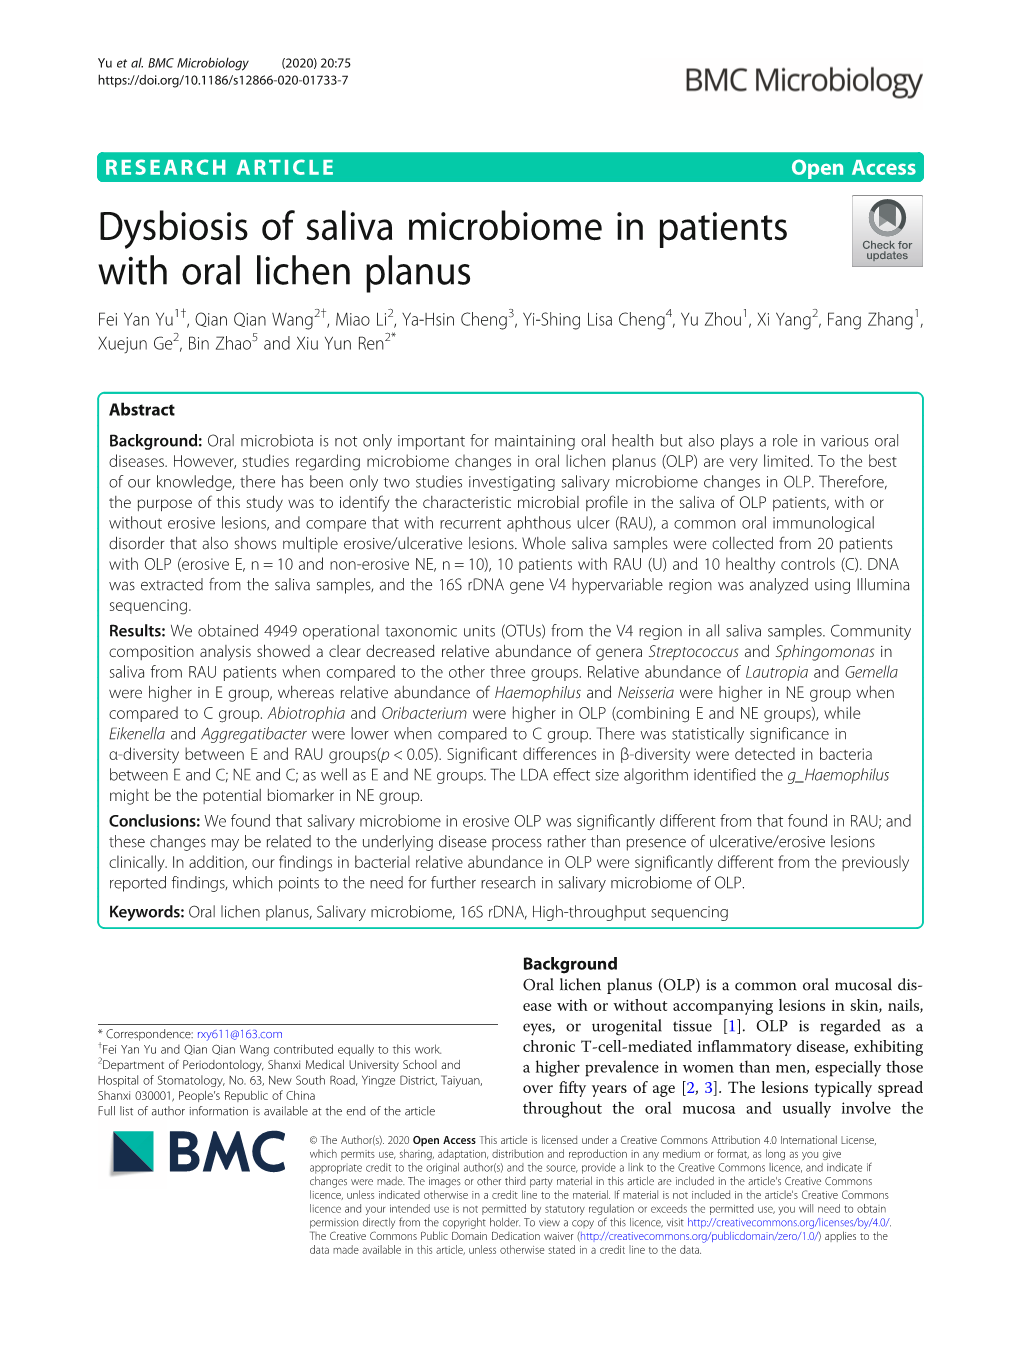 Dysbiosis of Saliva Microbiome in Patients With